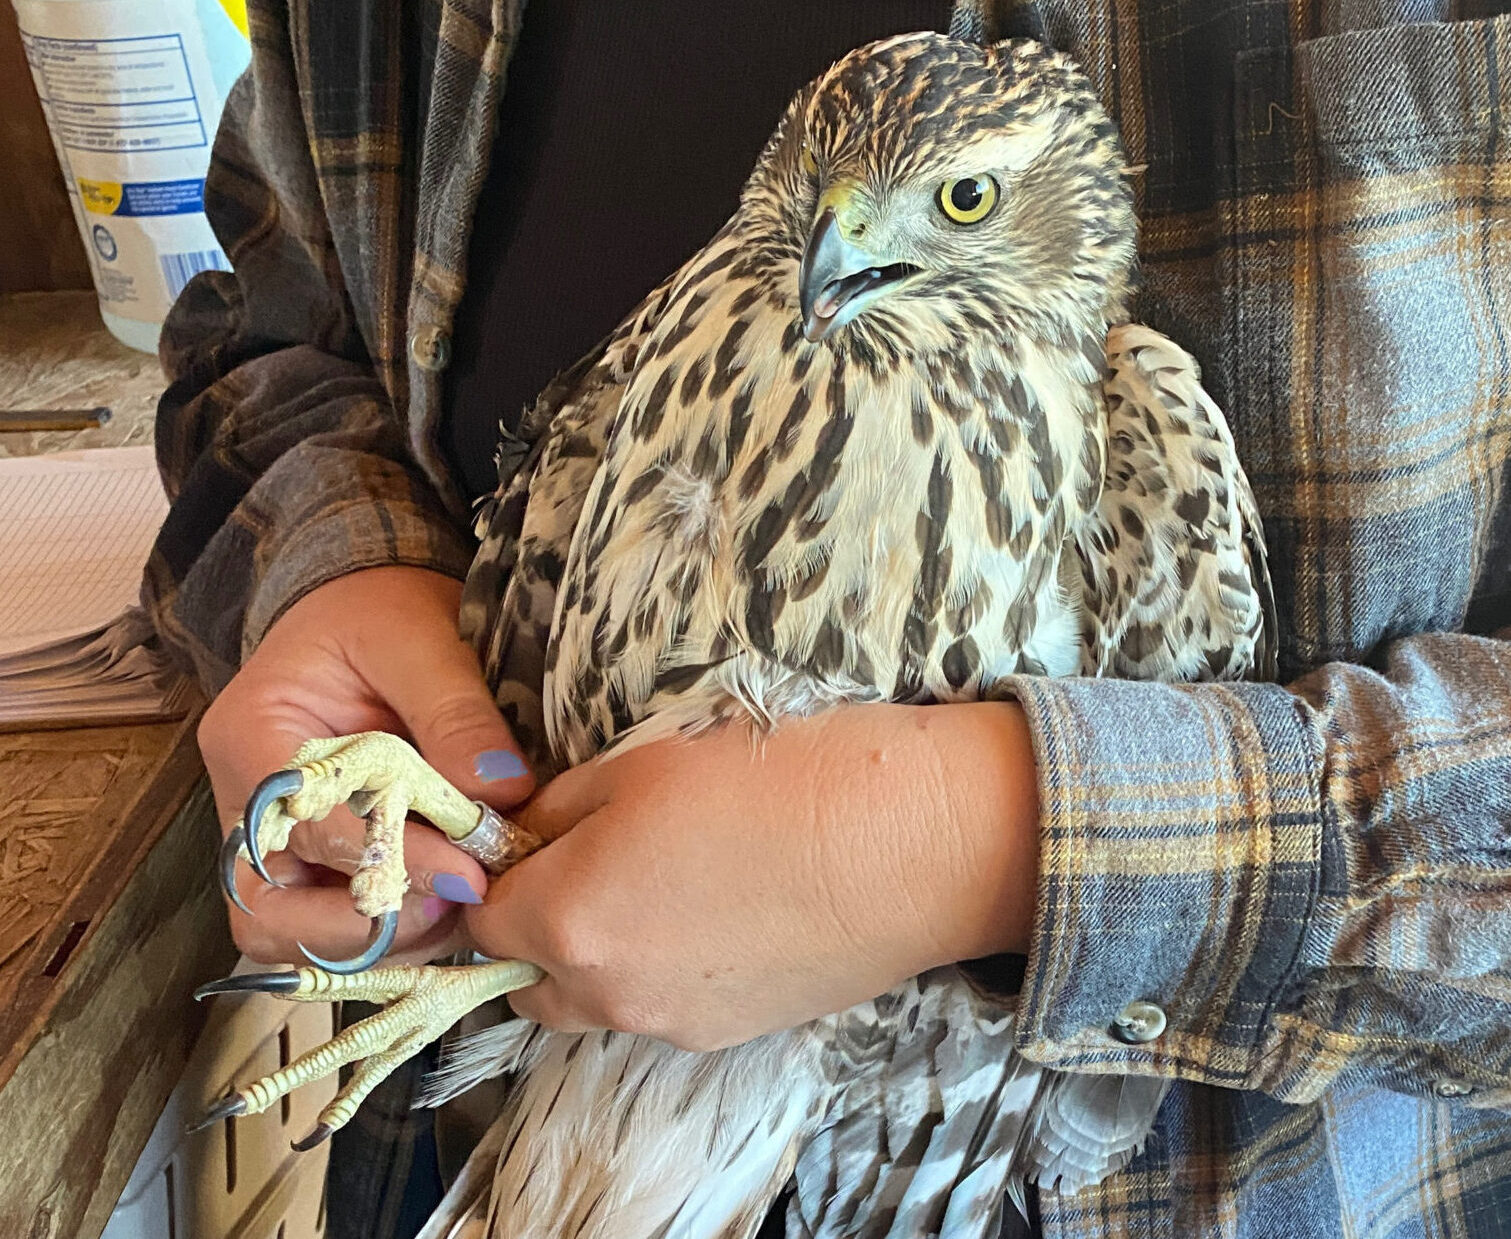 a scientists holds the large bird of prey against her torso, gently pressing the bird against her chest and arms to hold the folded wings, while her hands hold both feet so that she can attach the small metal leg band. the bird's large feet are about the size of the back of her hand, and the bird's body and tail are about the same length as the scientist's torso